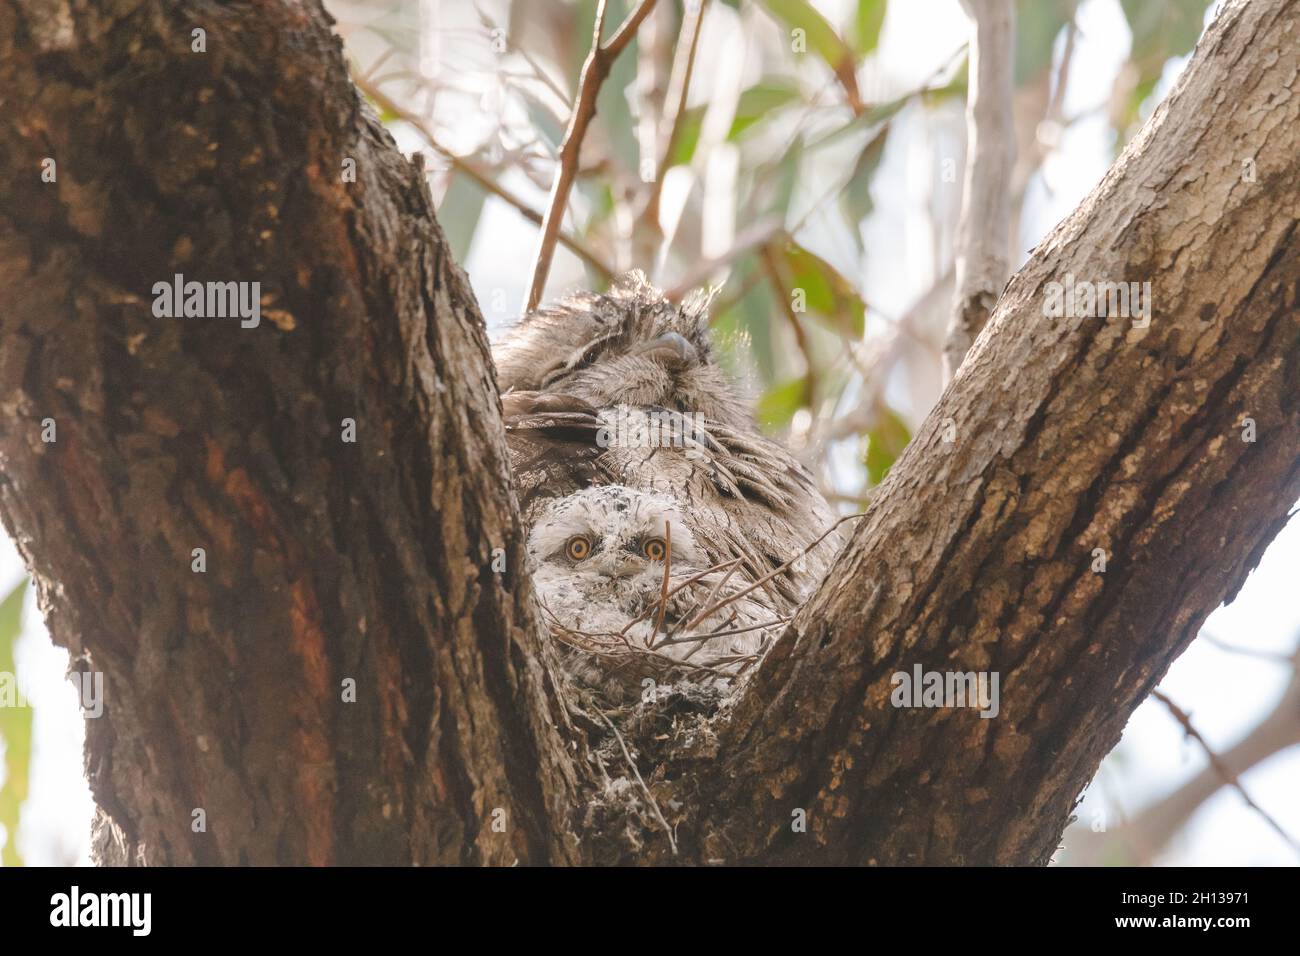 A baby Tawny Frogmouth chick nestled beside its parent in a tree fork nest. Stock Photo